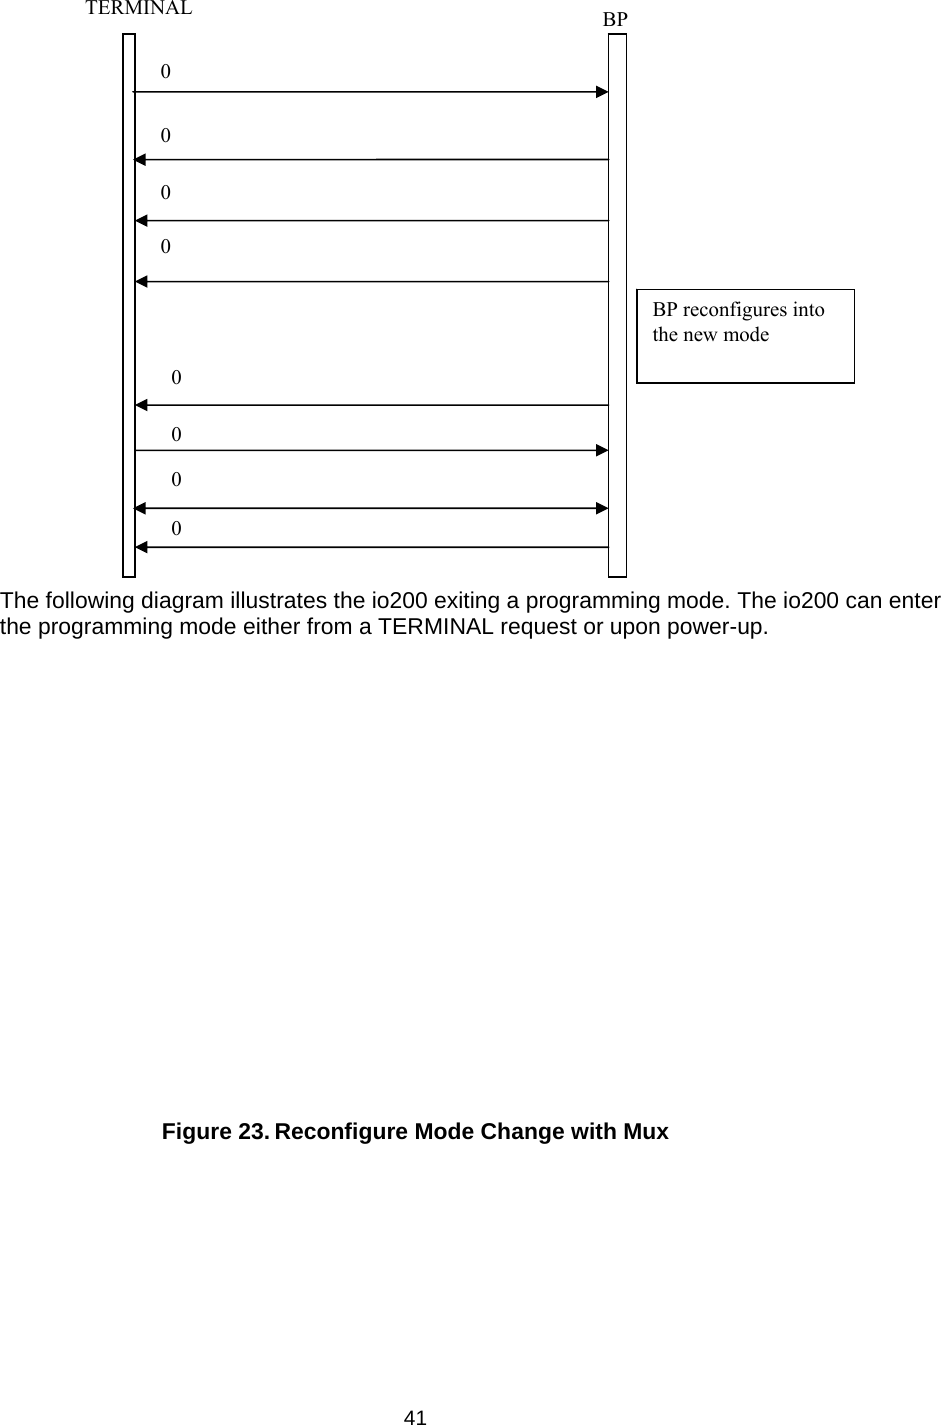   41 The following diagram illustrates the io200 exiting a programming mode. The io200 can enter the programming mode either from a TERMINAL request or upon power-up.             Figure 23. Reconfigure Mode Change with Mux 0 0 0 0 0 BP reconfigures into the new mode 0 0 BP0 TERMINAL 